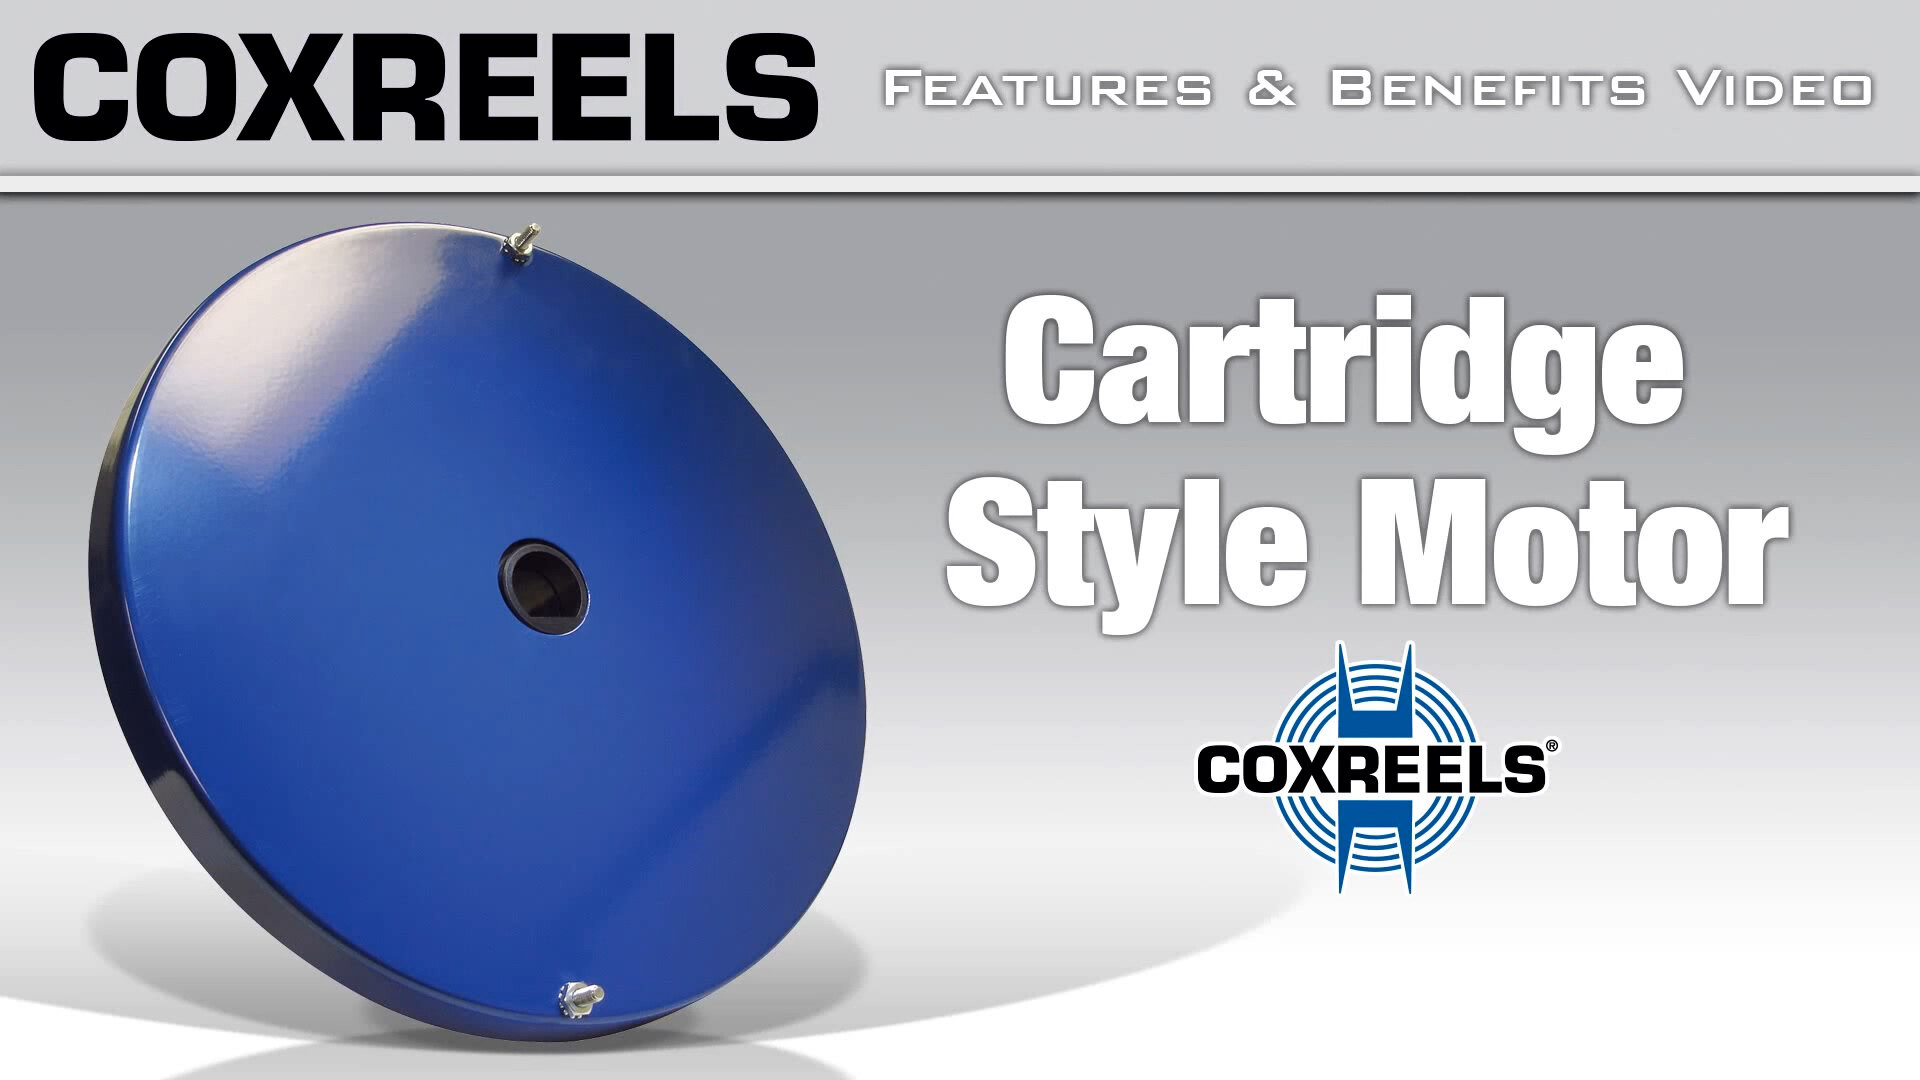 Coxreels Features & Benefits - Cartridge Style Motor Video